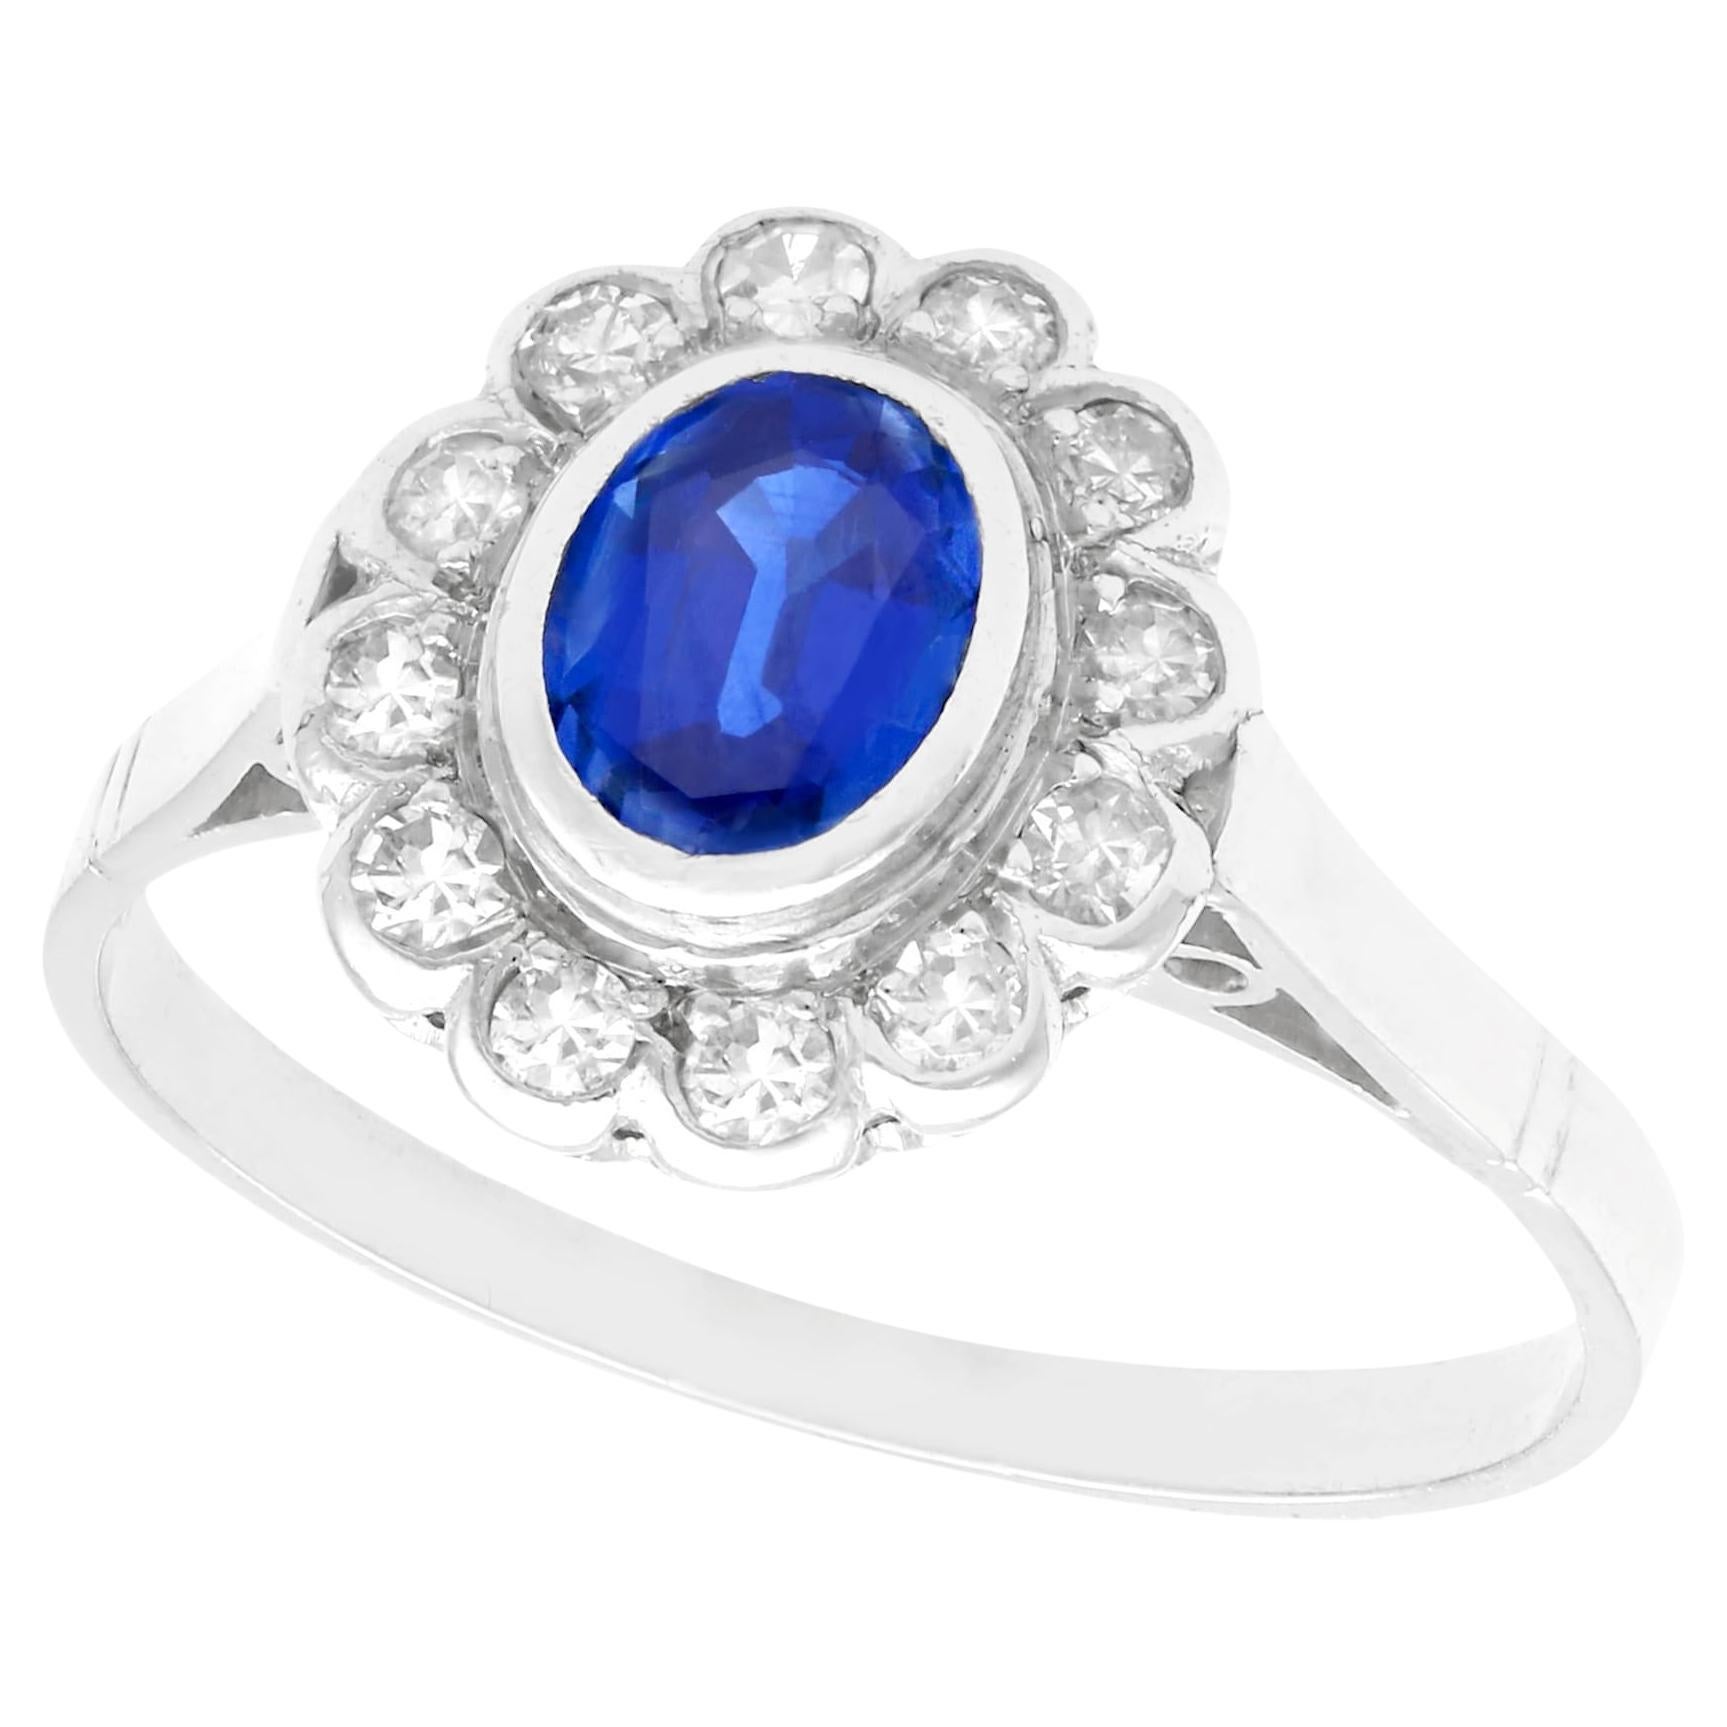 1.12 Carat Oval Cut Sapphire and Diamond Platinum Cluster Ring Circa 1930 For Sale